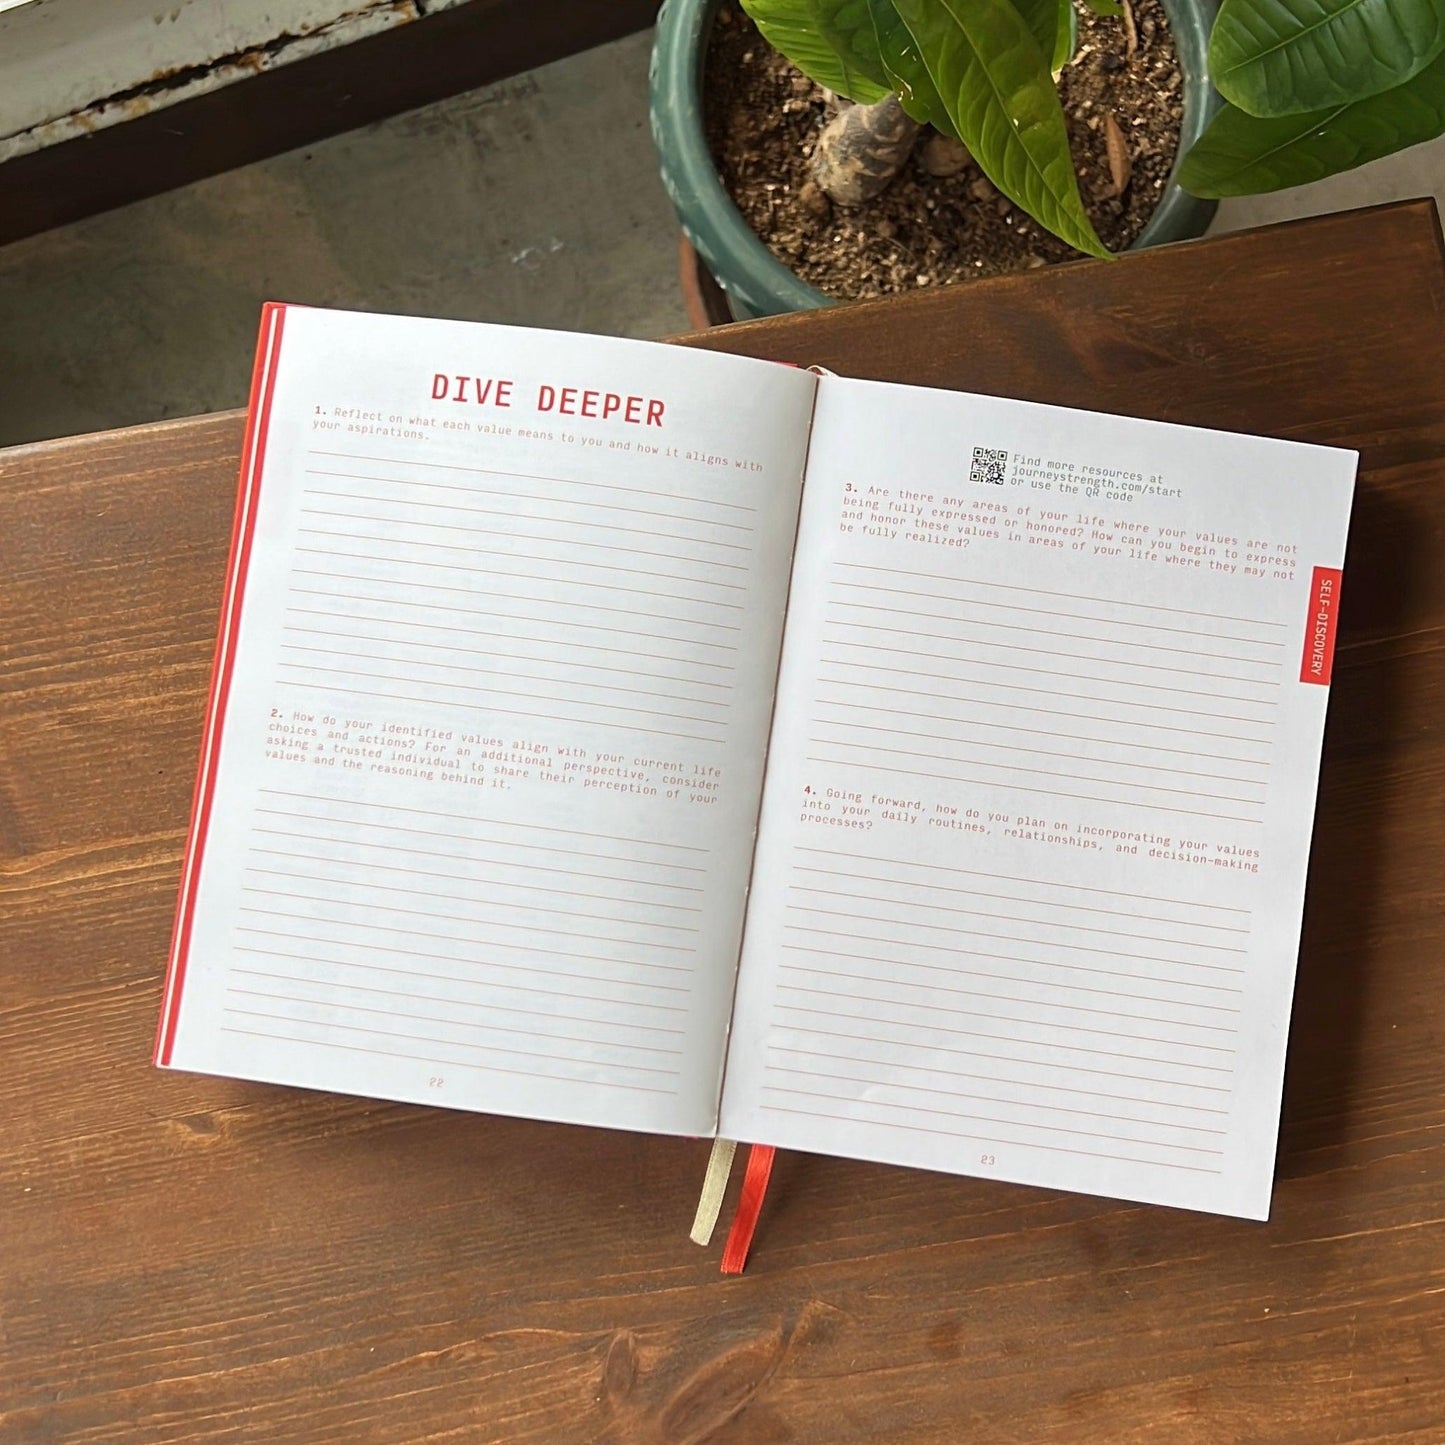 #guidedjournal #toolsforthejourney #goalsettingjournal #rachaeladams #journeystrength product photo - inside pages with dive deeper reflective prompts - tools for the journey guided journal